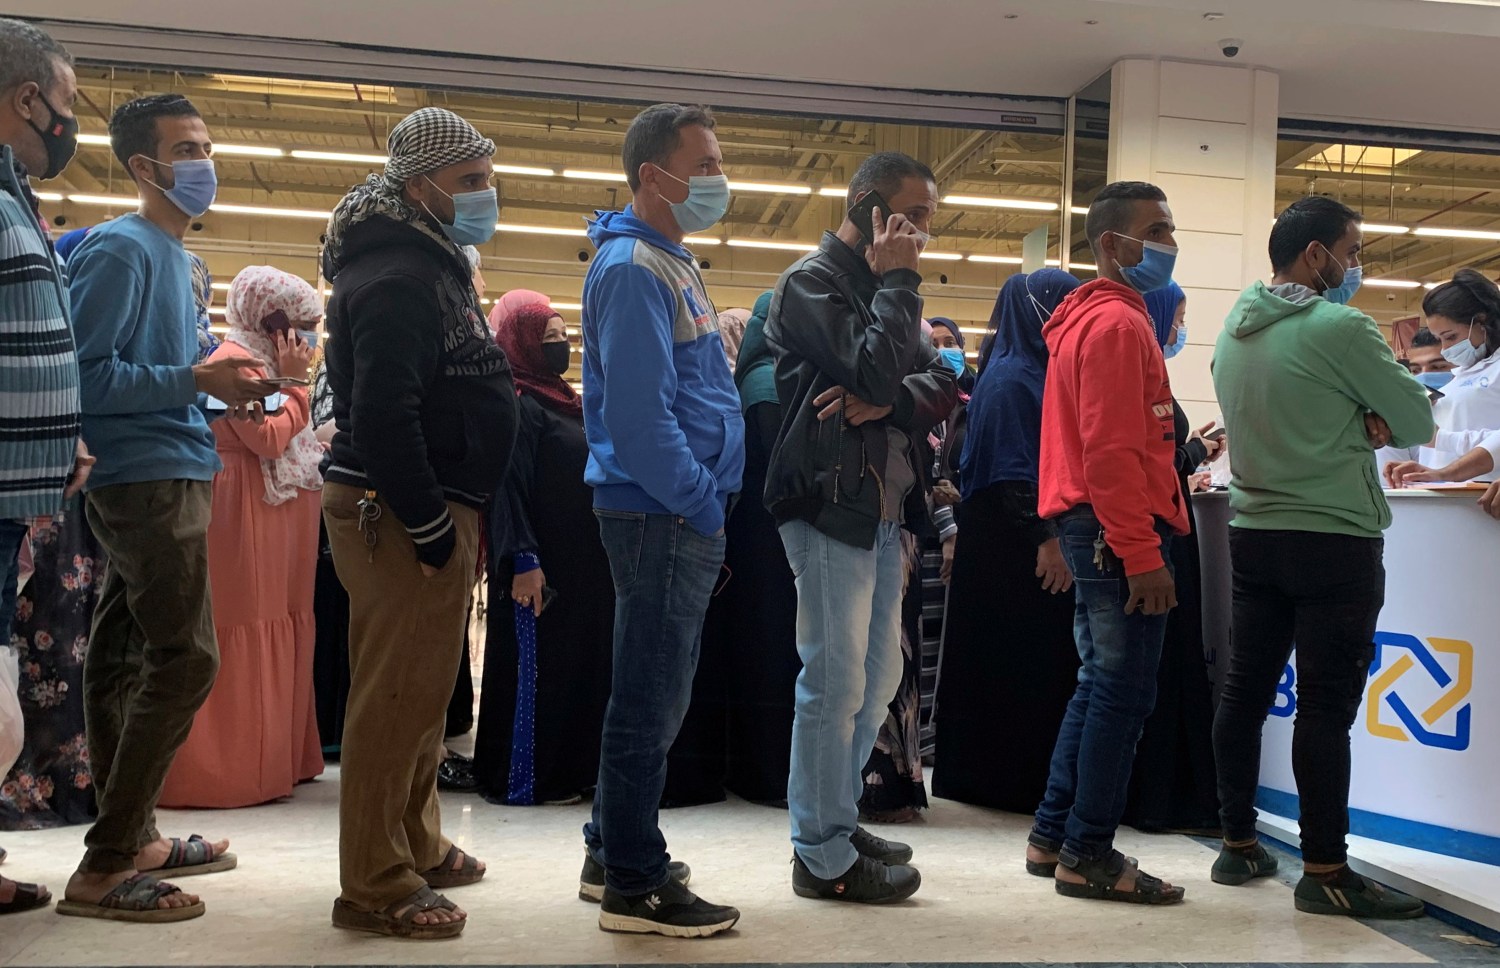 People wearing protective face masks wait in line in front of Al Ahli Bank of Kuwait (ABK) stand inside a Carrefour hypermarket ahead of Black Friday, amid the coronavirus disease (COVID-19) pandemic in the Cairo suburb of Maadi, Egypt November 26, 2020. REUTERS/Amr Abdallah Dalsh